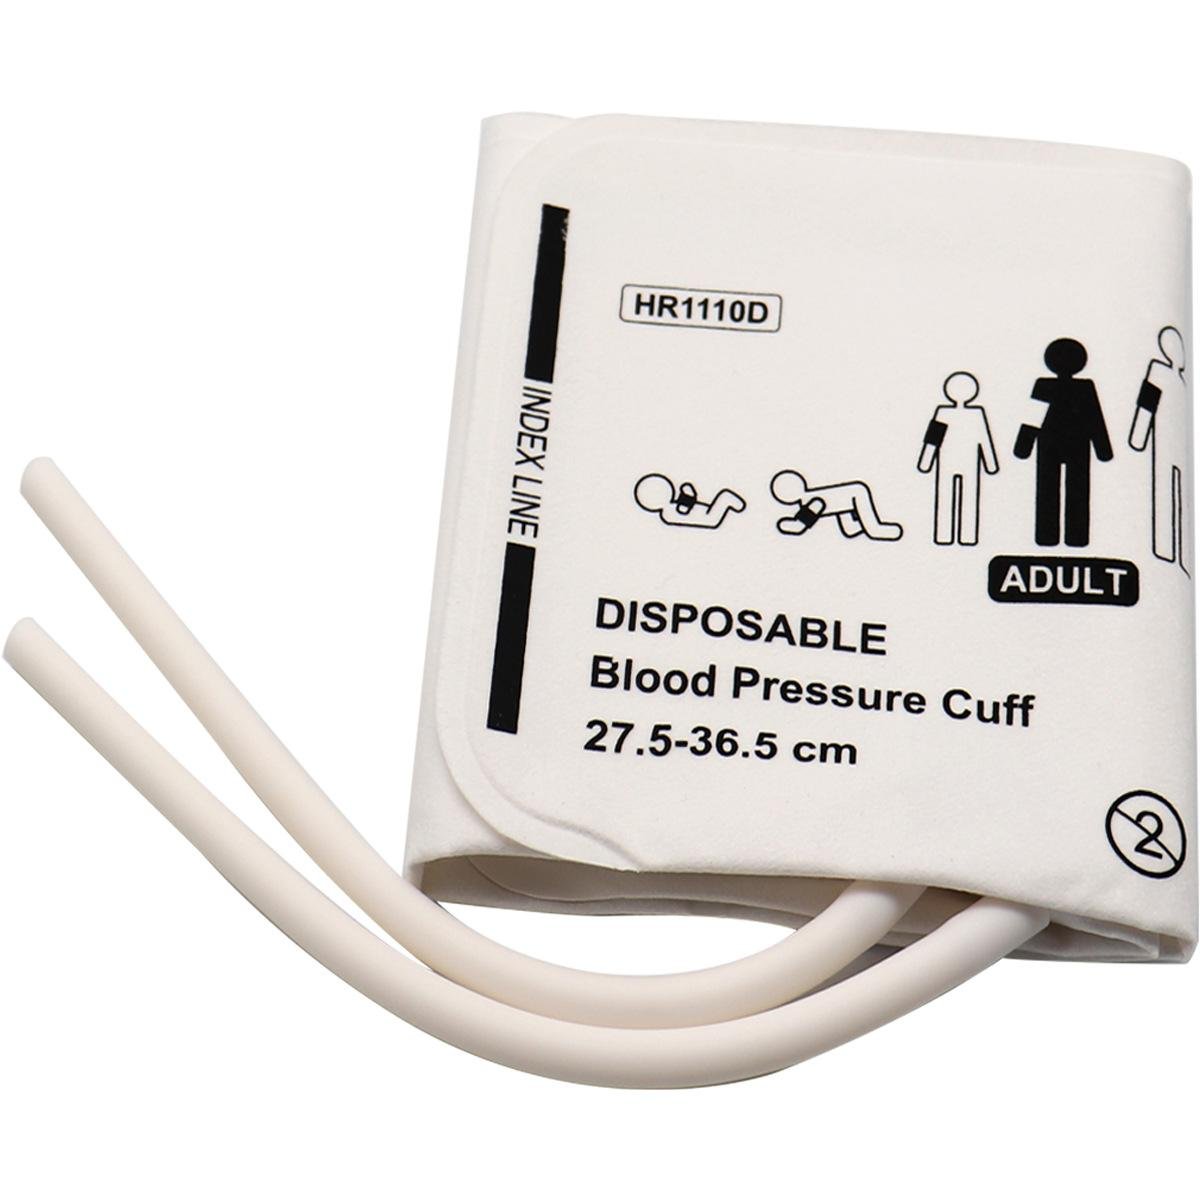 Double tubes medical reusable or disposable blood pressure cuff HR1110